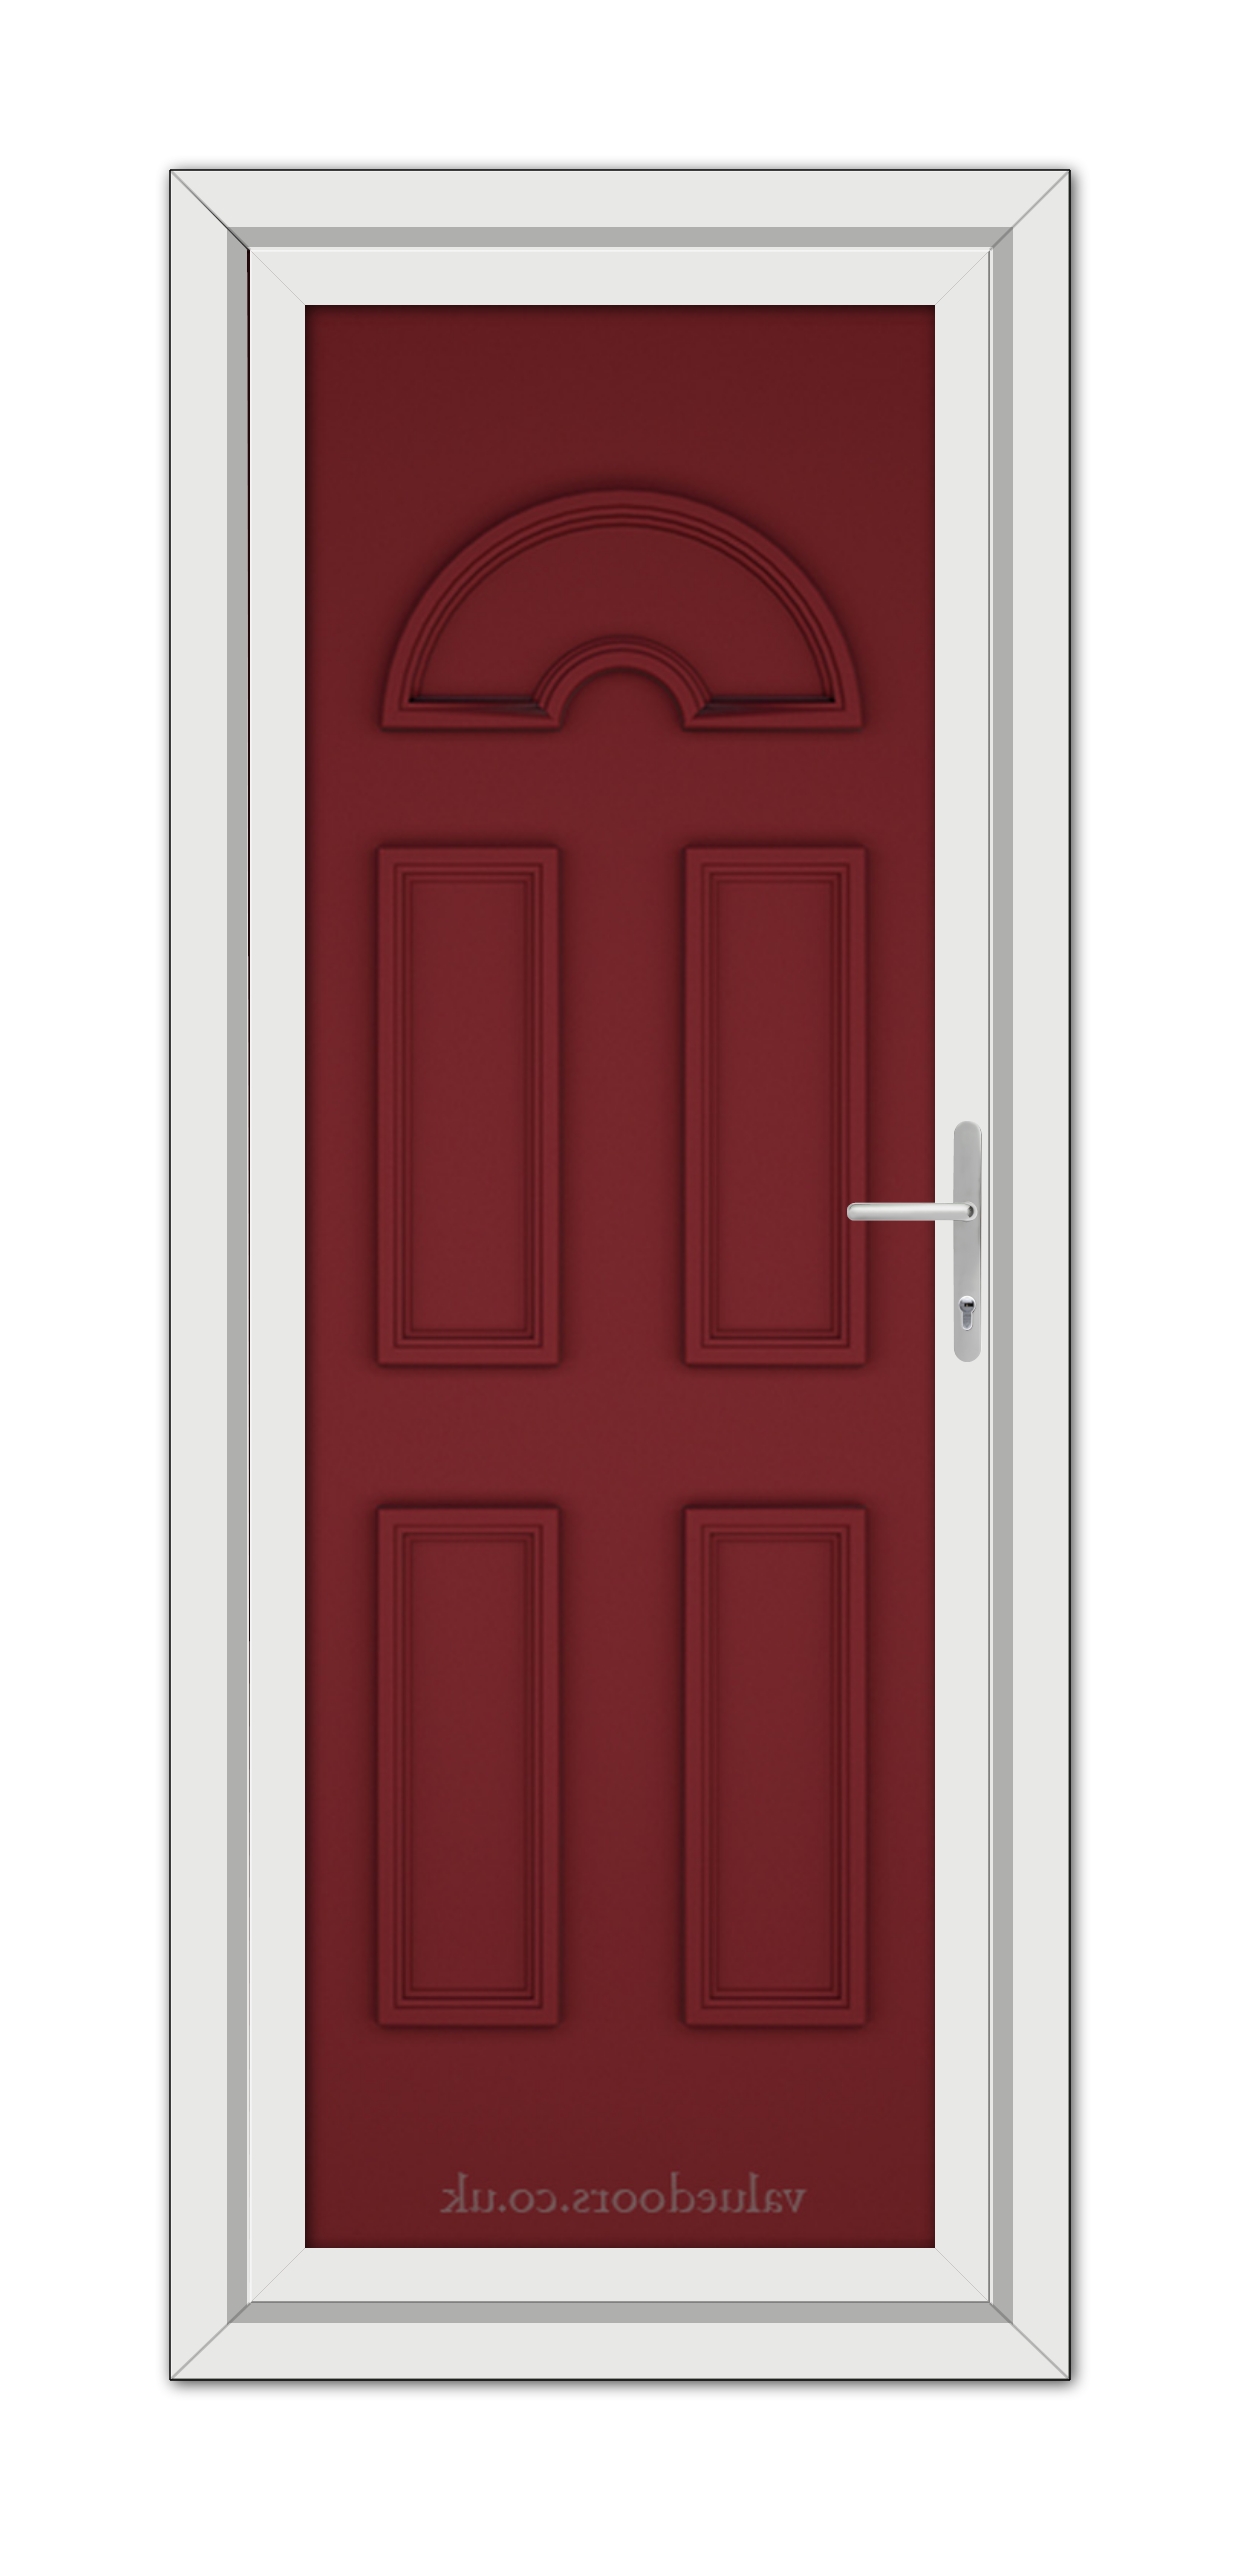 A closed Red Sandringham Solid uPVC Door with a semi-circular window at the top, surrounded by a white frame, featuring a metallic handle on the right side.